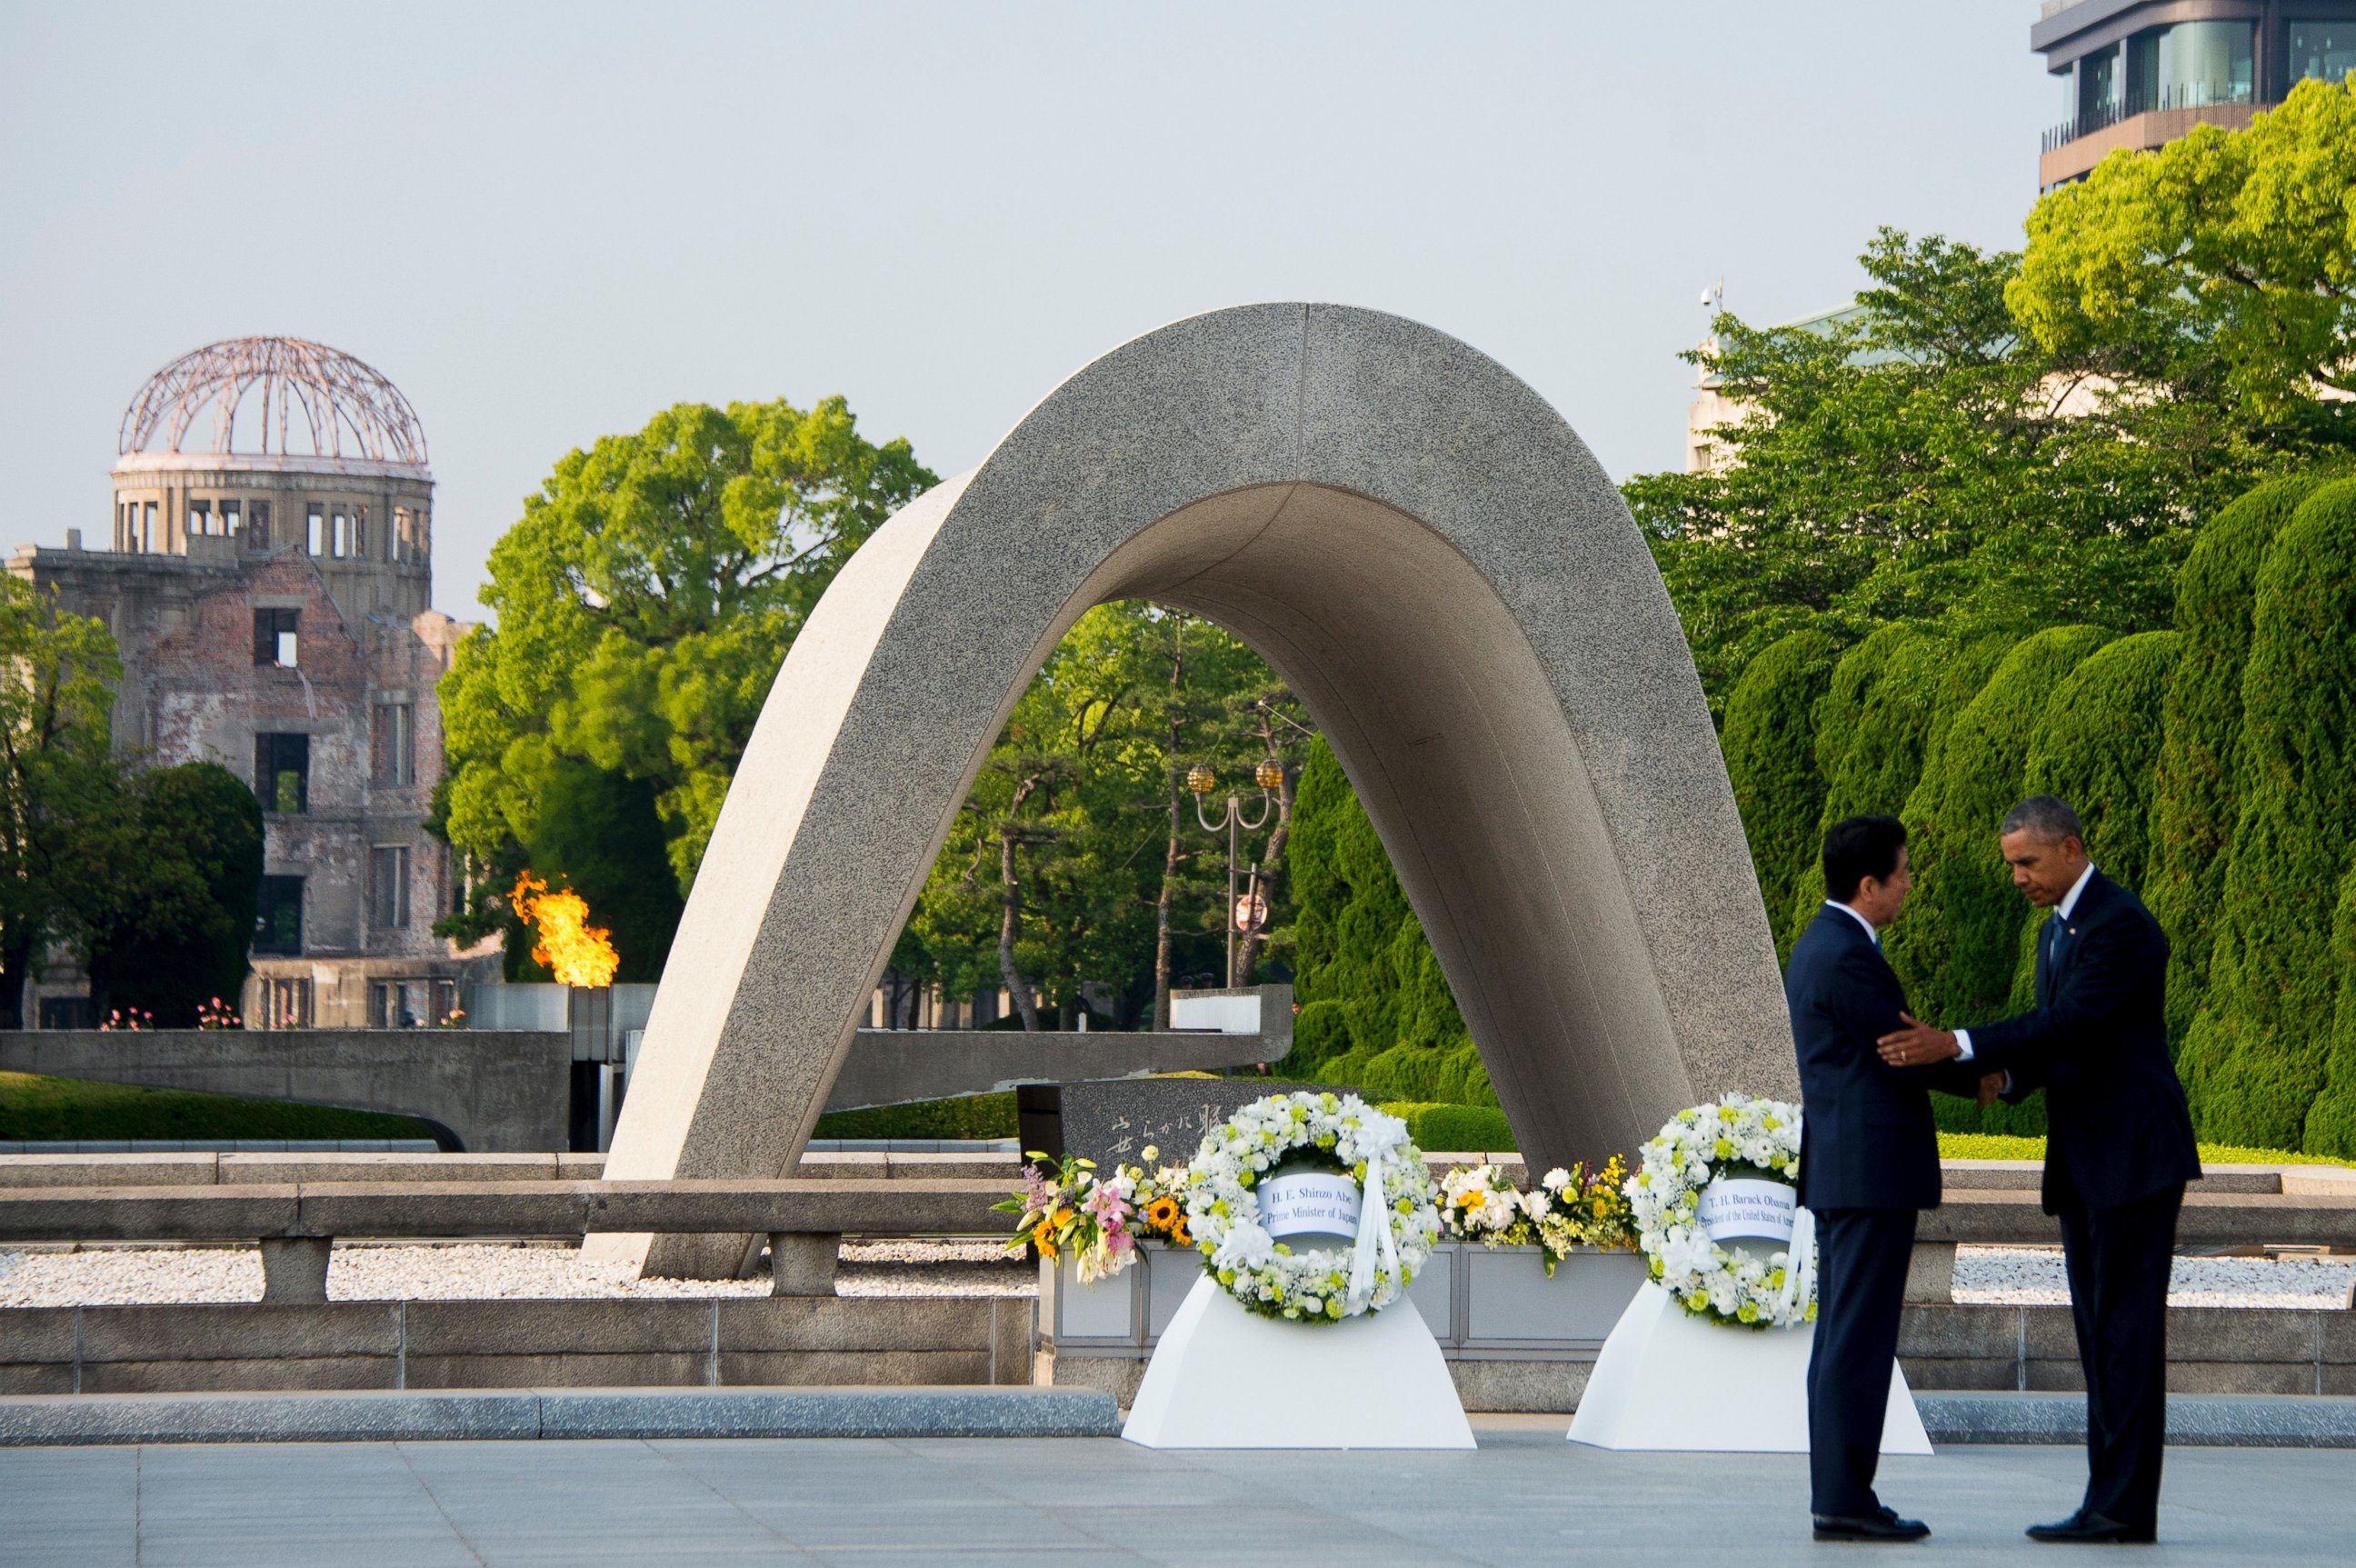 PHOTO: President Barack Obama and Japanese Prime Minister Shinzo Abe shake hands after laying wreaths at the Hiroshima Peace Memorial Park in Hiroshima on May 27, 2016.